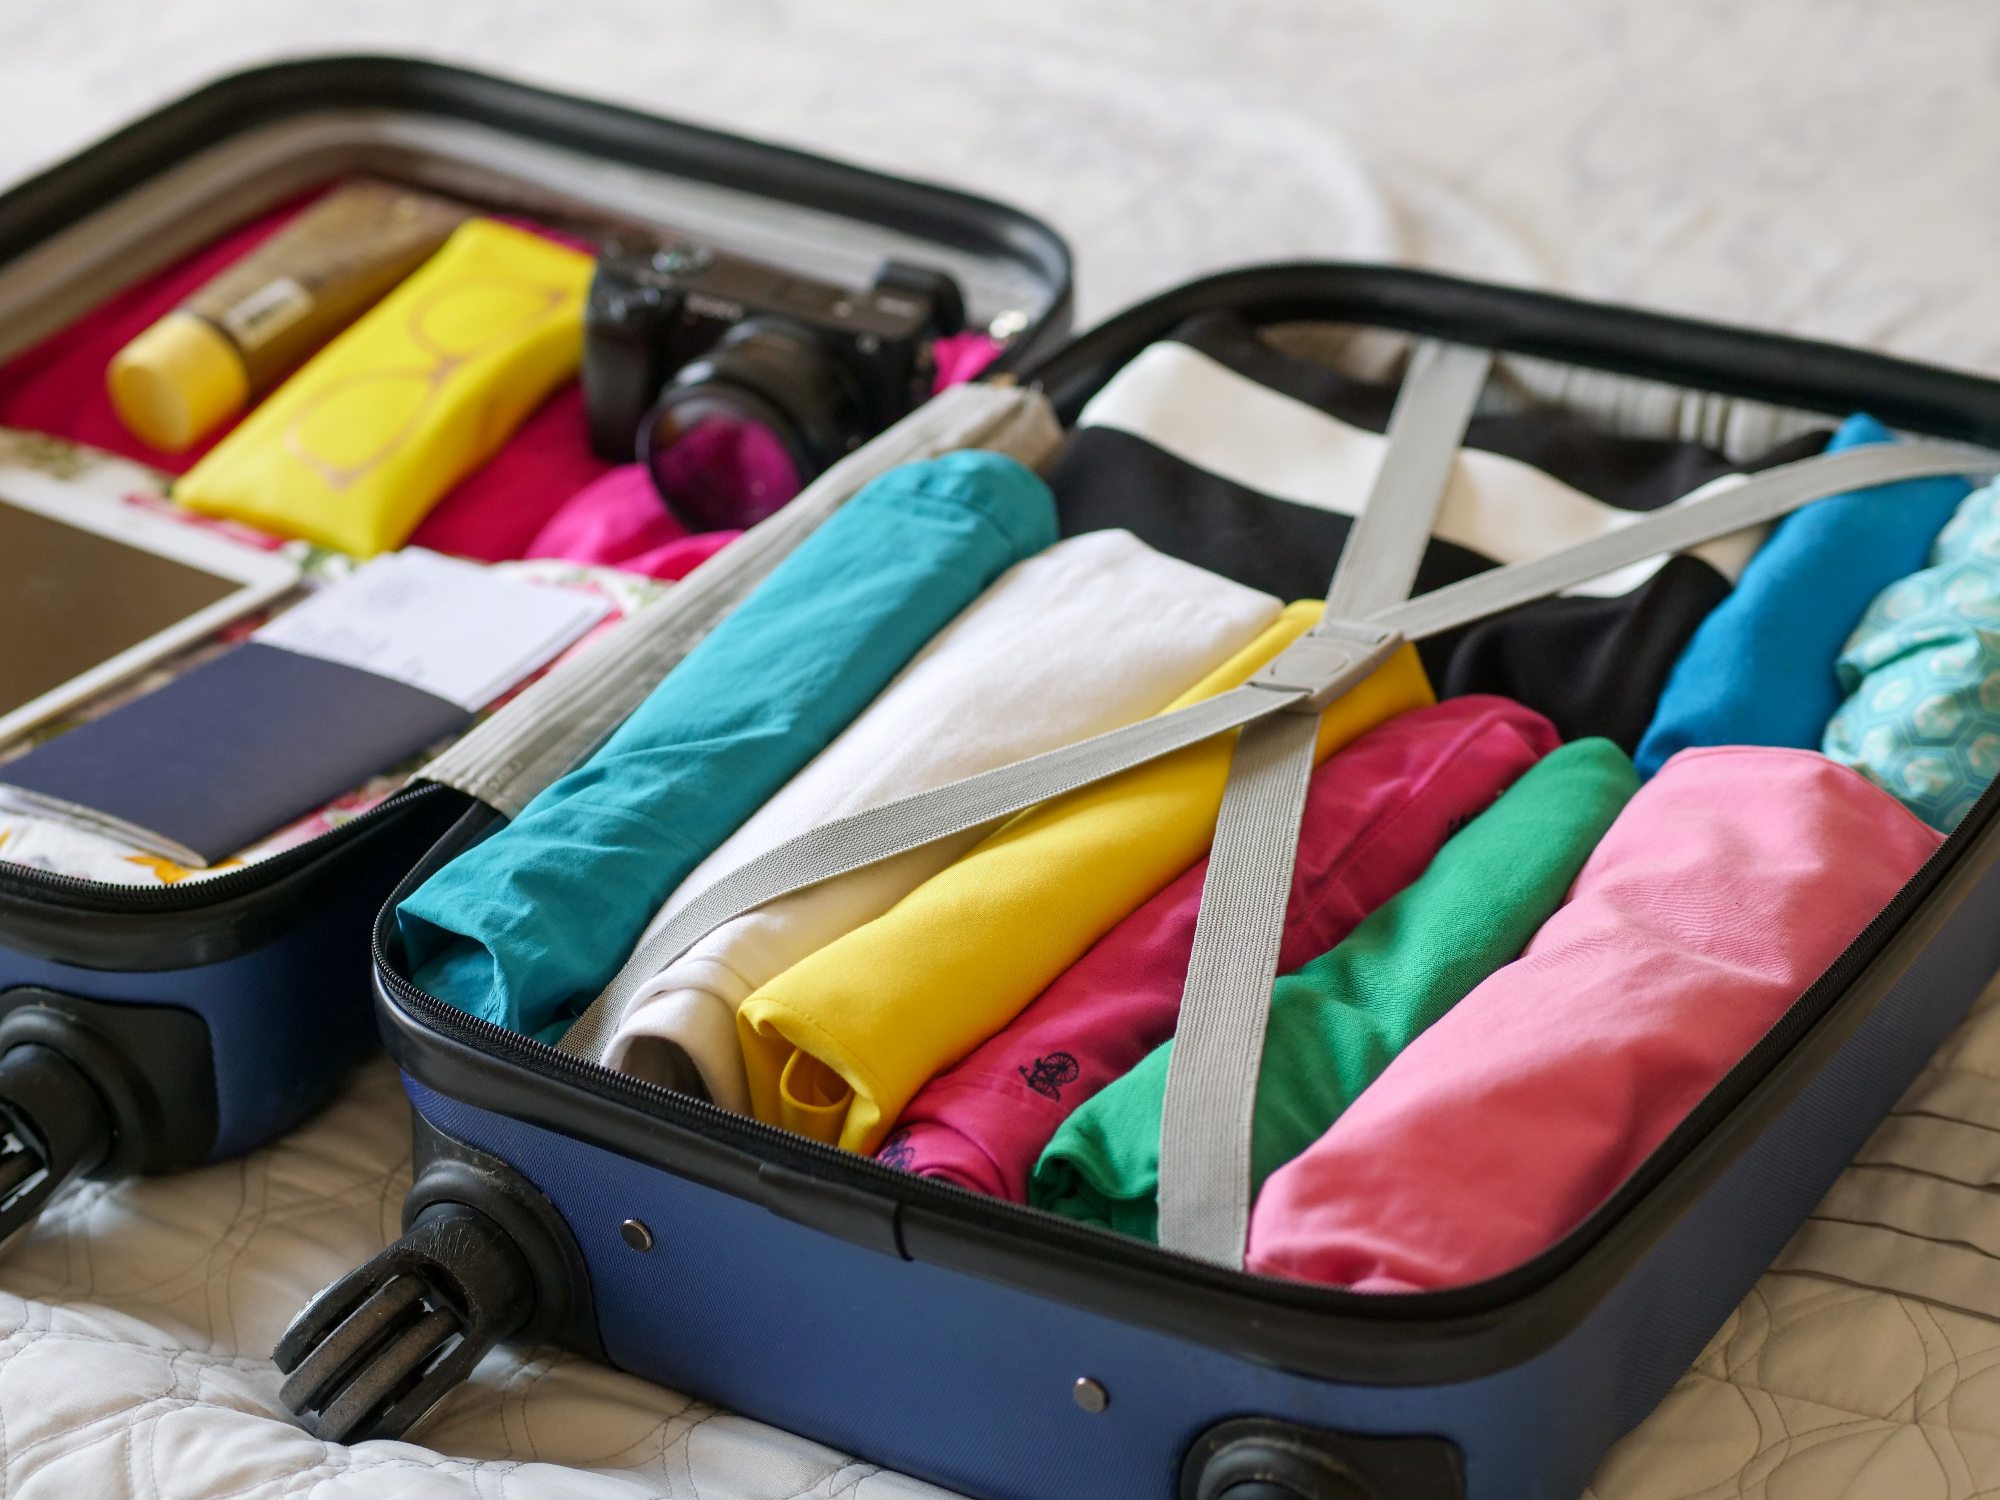 How to pack a knife in checked baggage